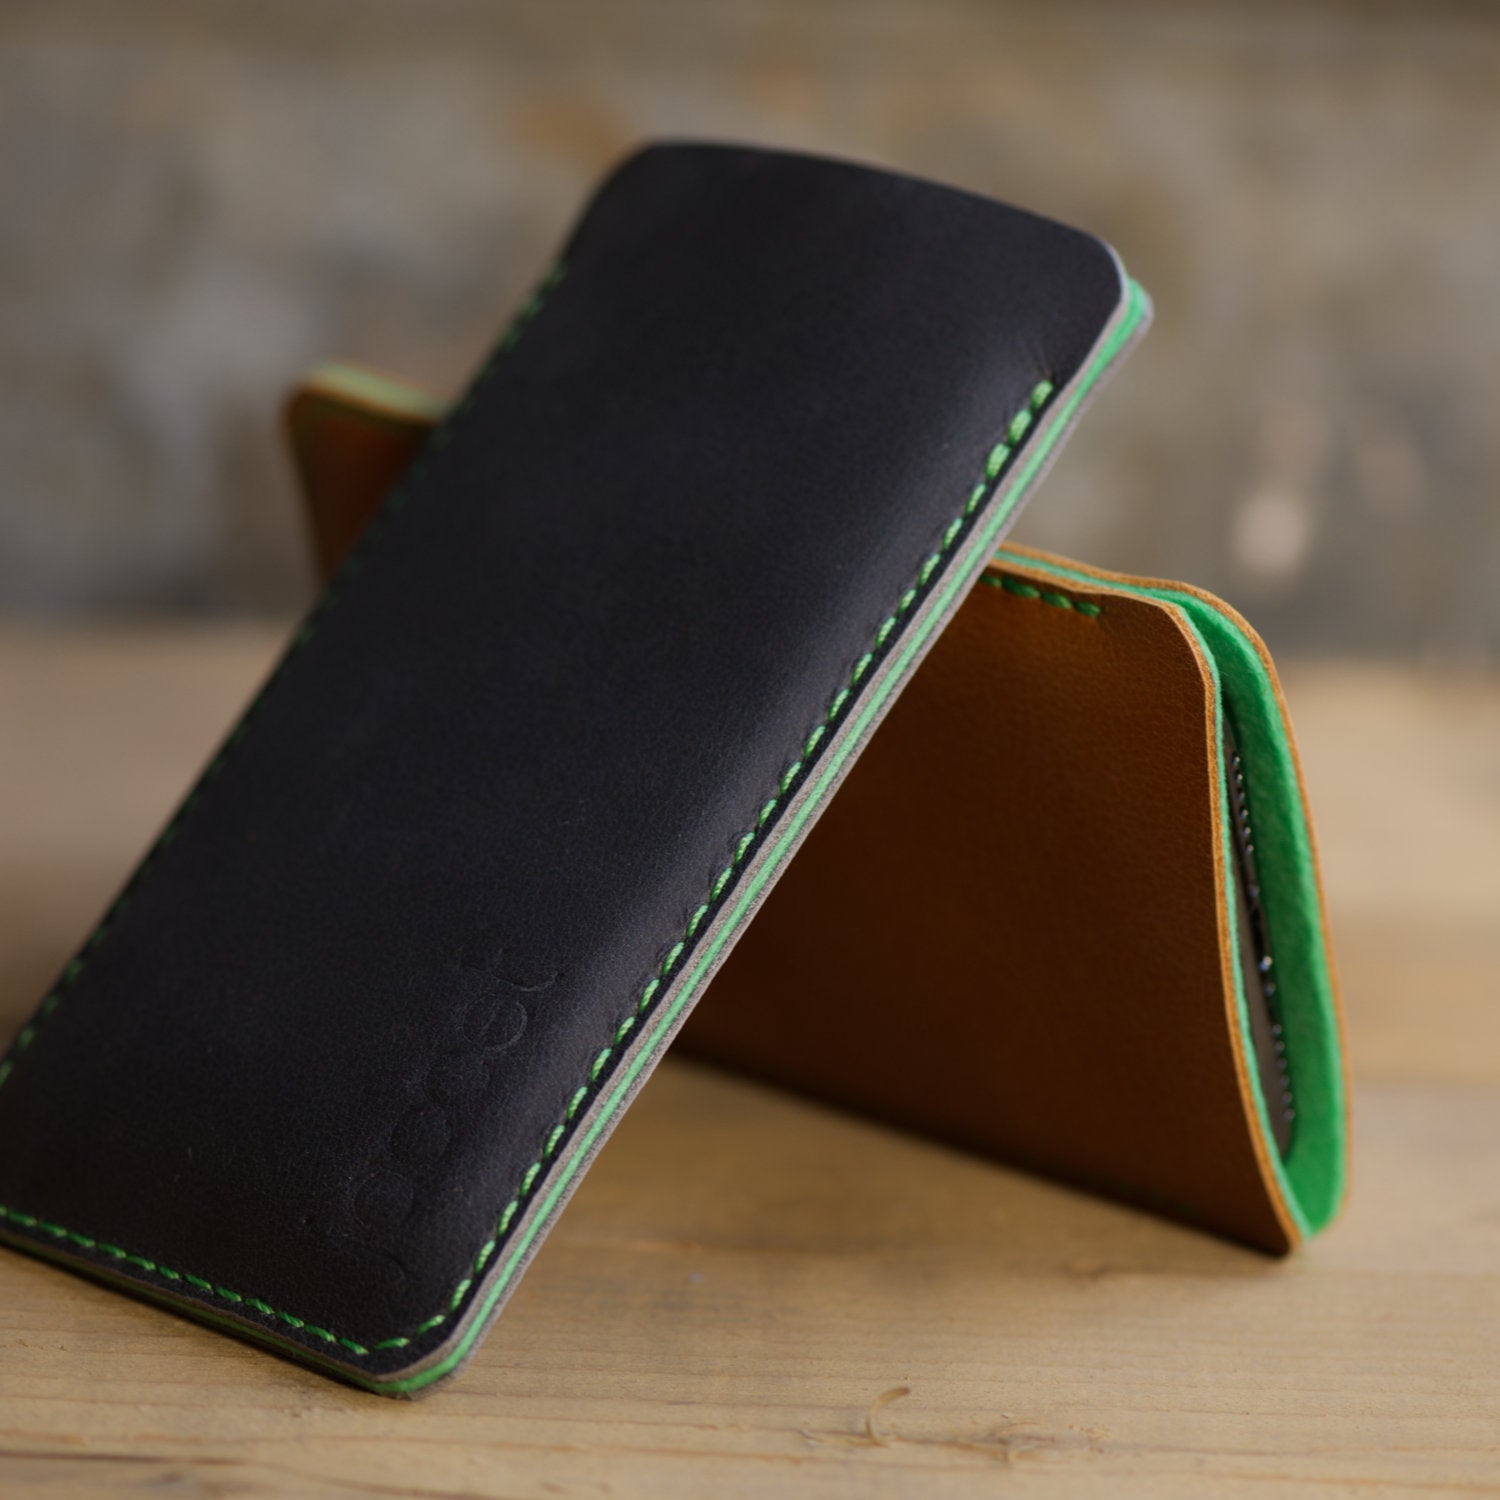 JACCET leather iPhone sleeve - anthracite/black leather with green wool felt. 100% Handmade